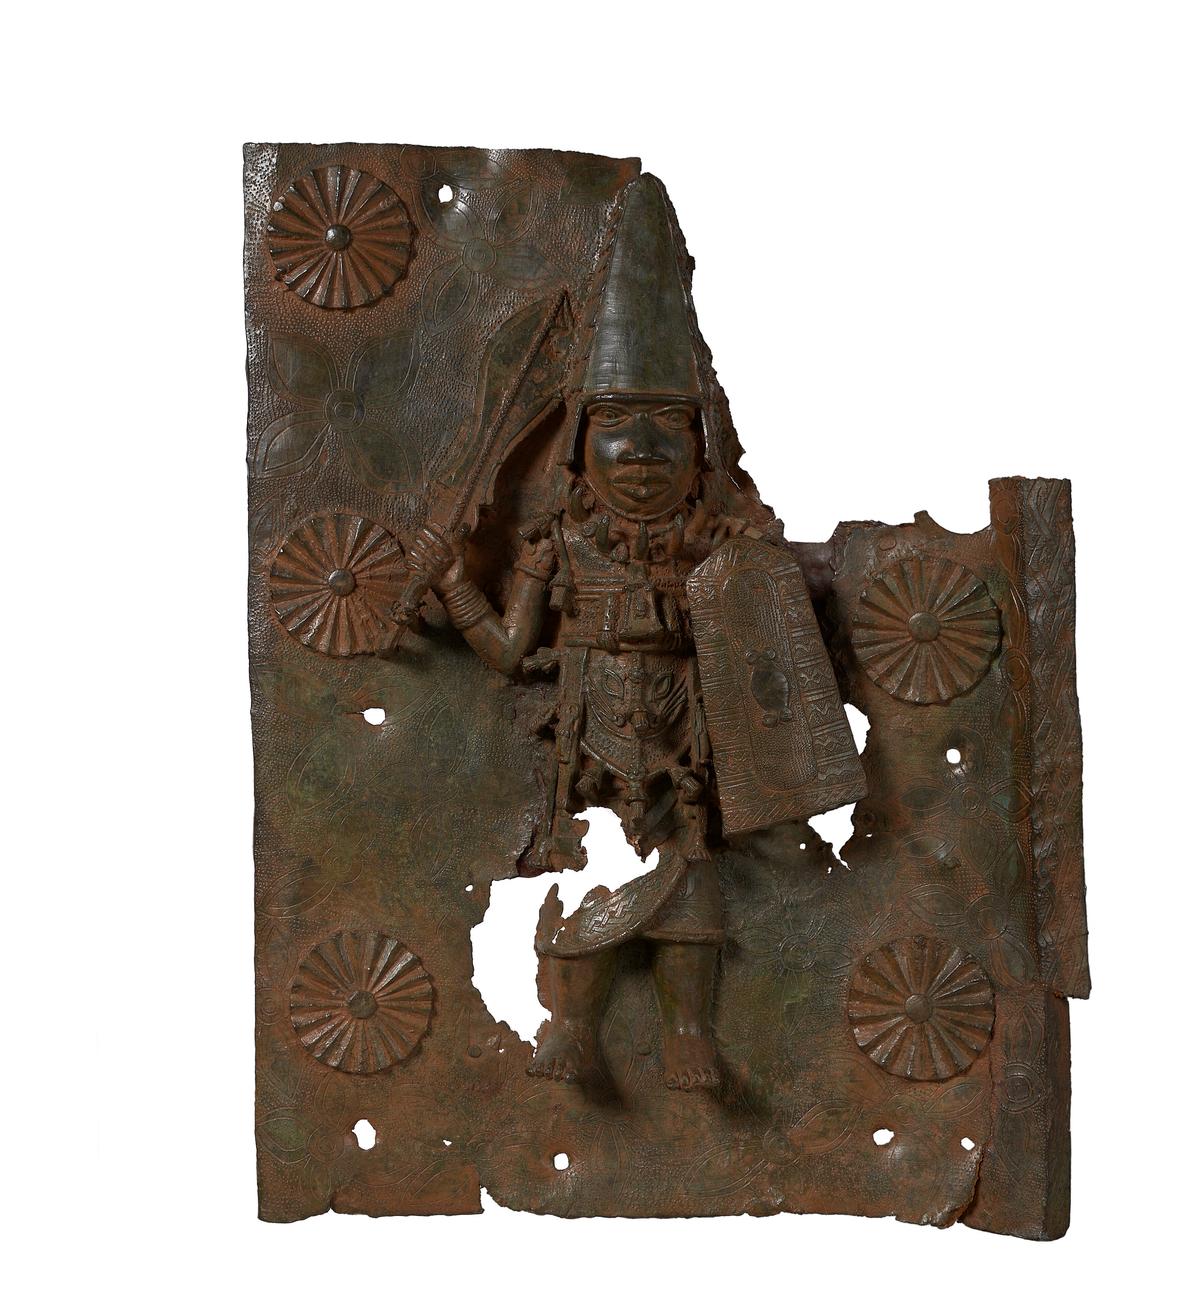 A brass plaque depicting Agban, the Ezomo (deputy commander in chief of the Benin army), toward the end of the reign of Oba Orhogbua (circa 1550–1578) and the start of the reign of Oba Ehengbuda (circa 1578–1608). (Courtesy of Horniman Museum and Gardens via AP)